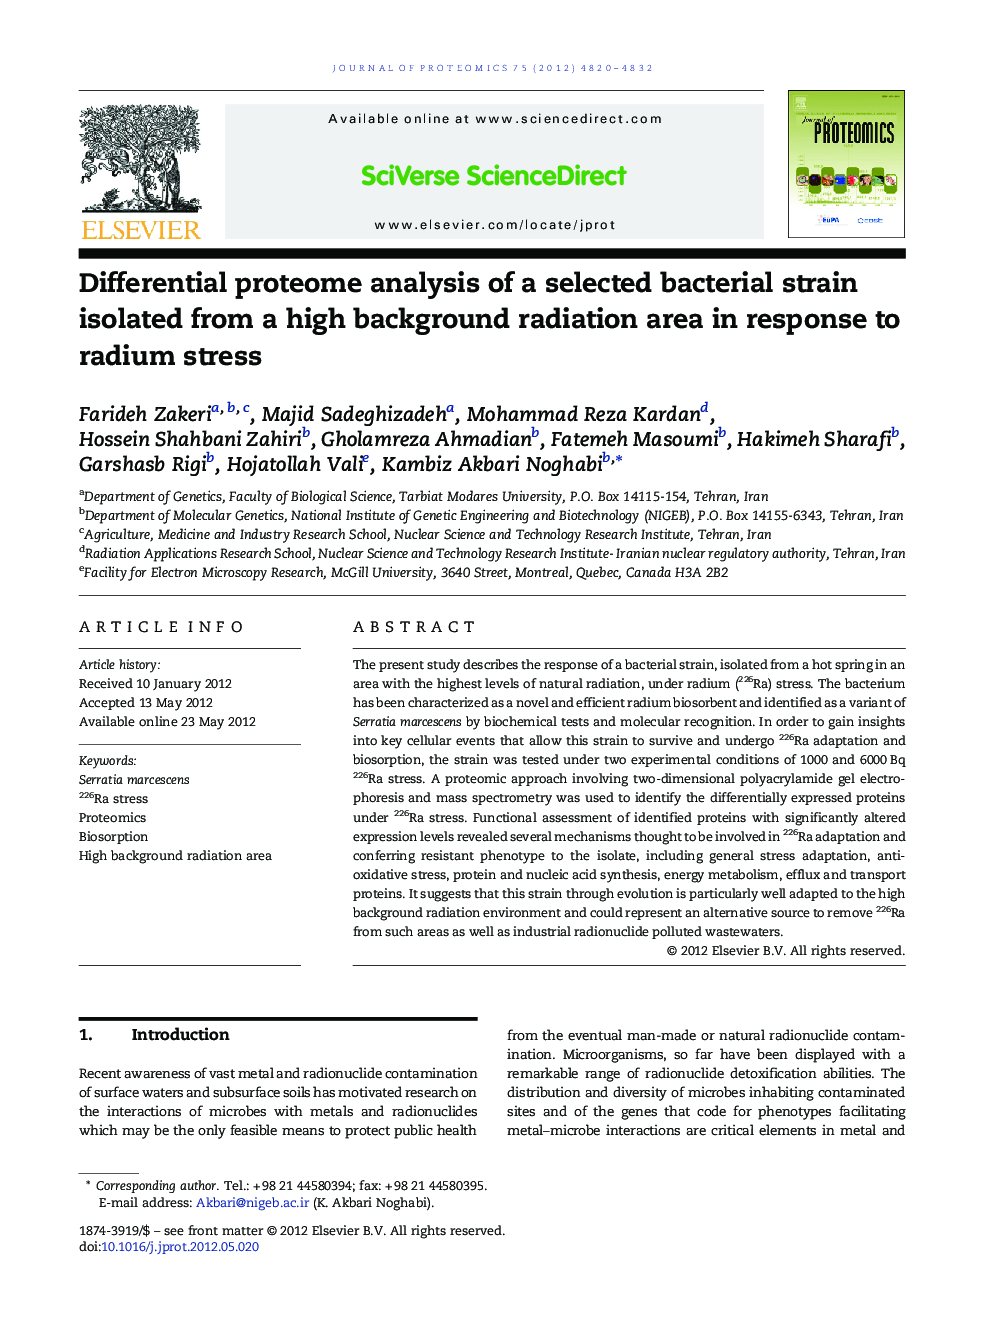 Differential proteome analysis of a selected bacterial strain isolated from a high background radiation area in response to radium stress